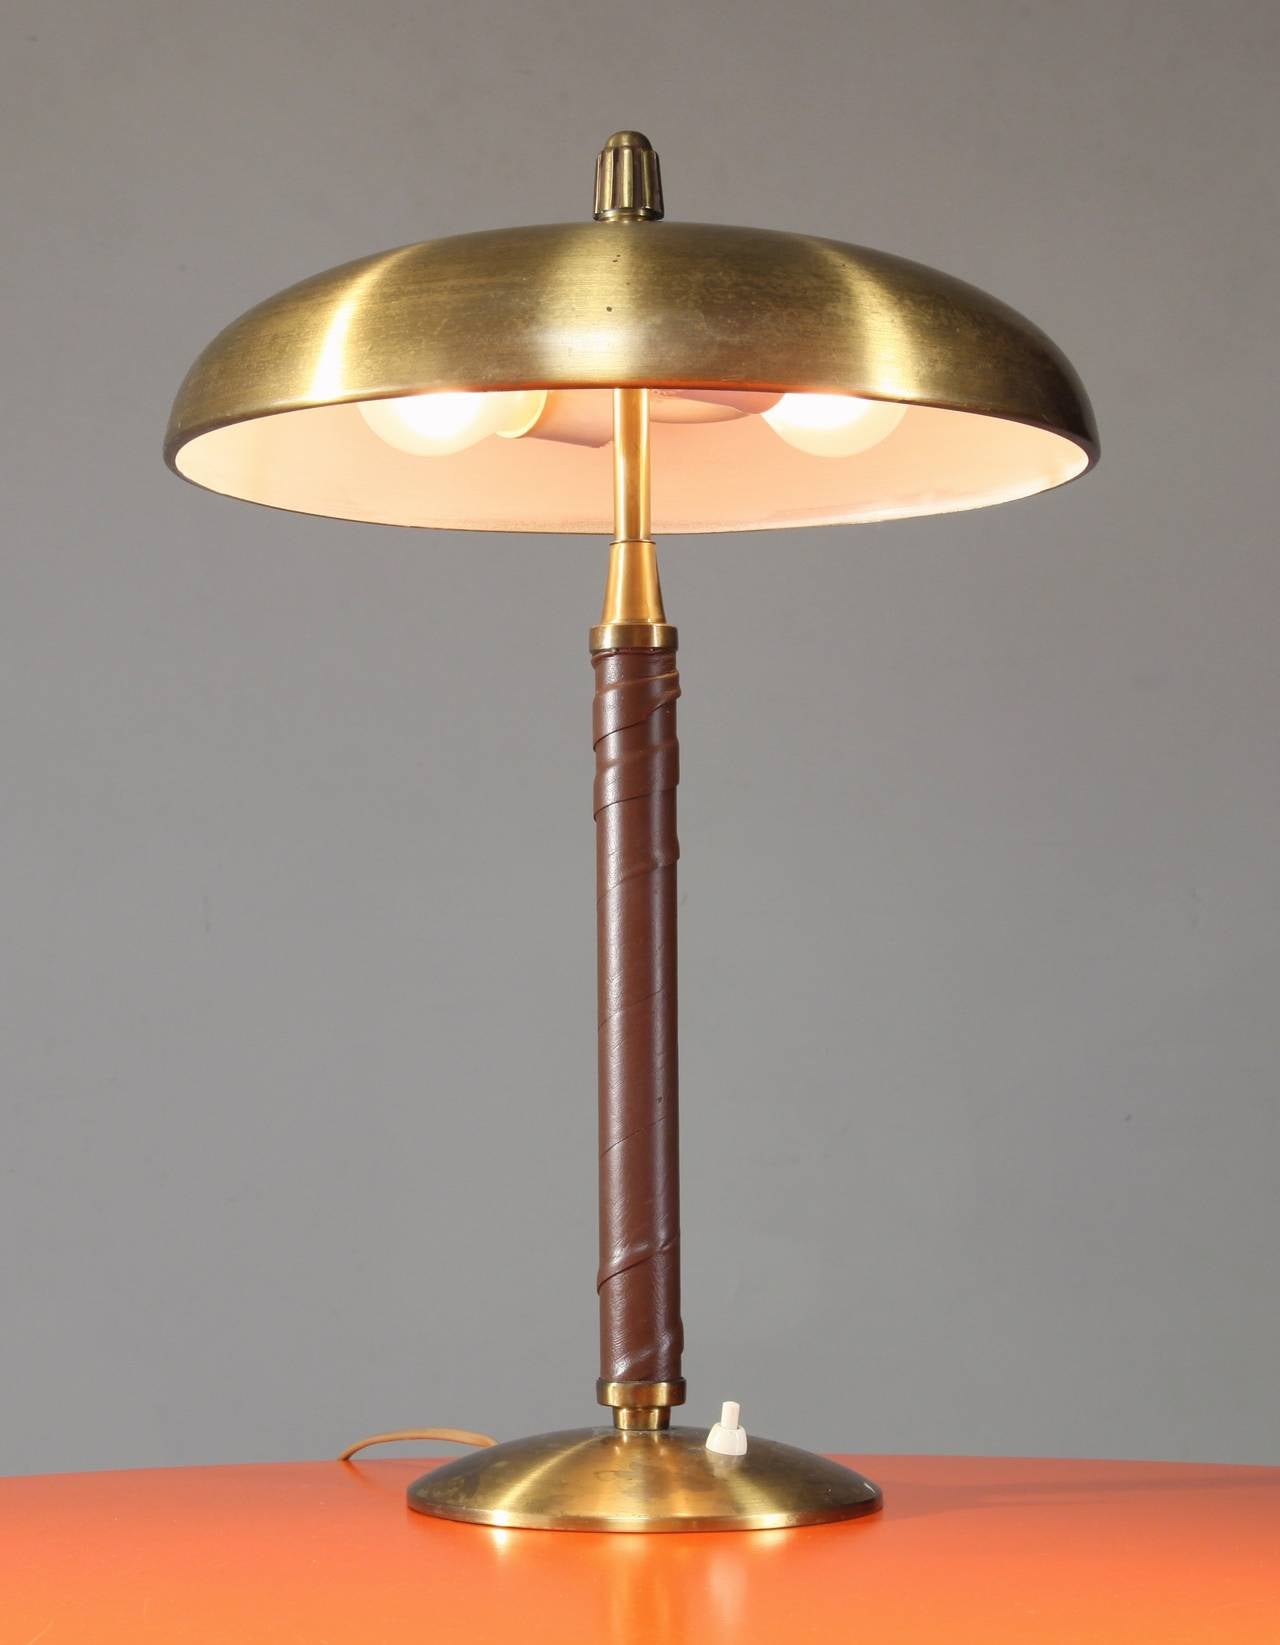 A table lamp made of brass with a leather wrapped stem, designed and made by Einar Bäckström in his own workshop in Malmö, Sweden.
The lamp has two lightbulbs and is in an excellent condition.
